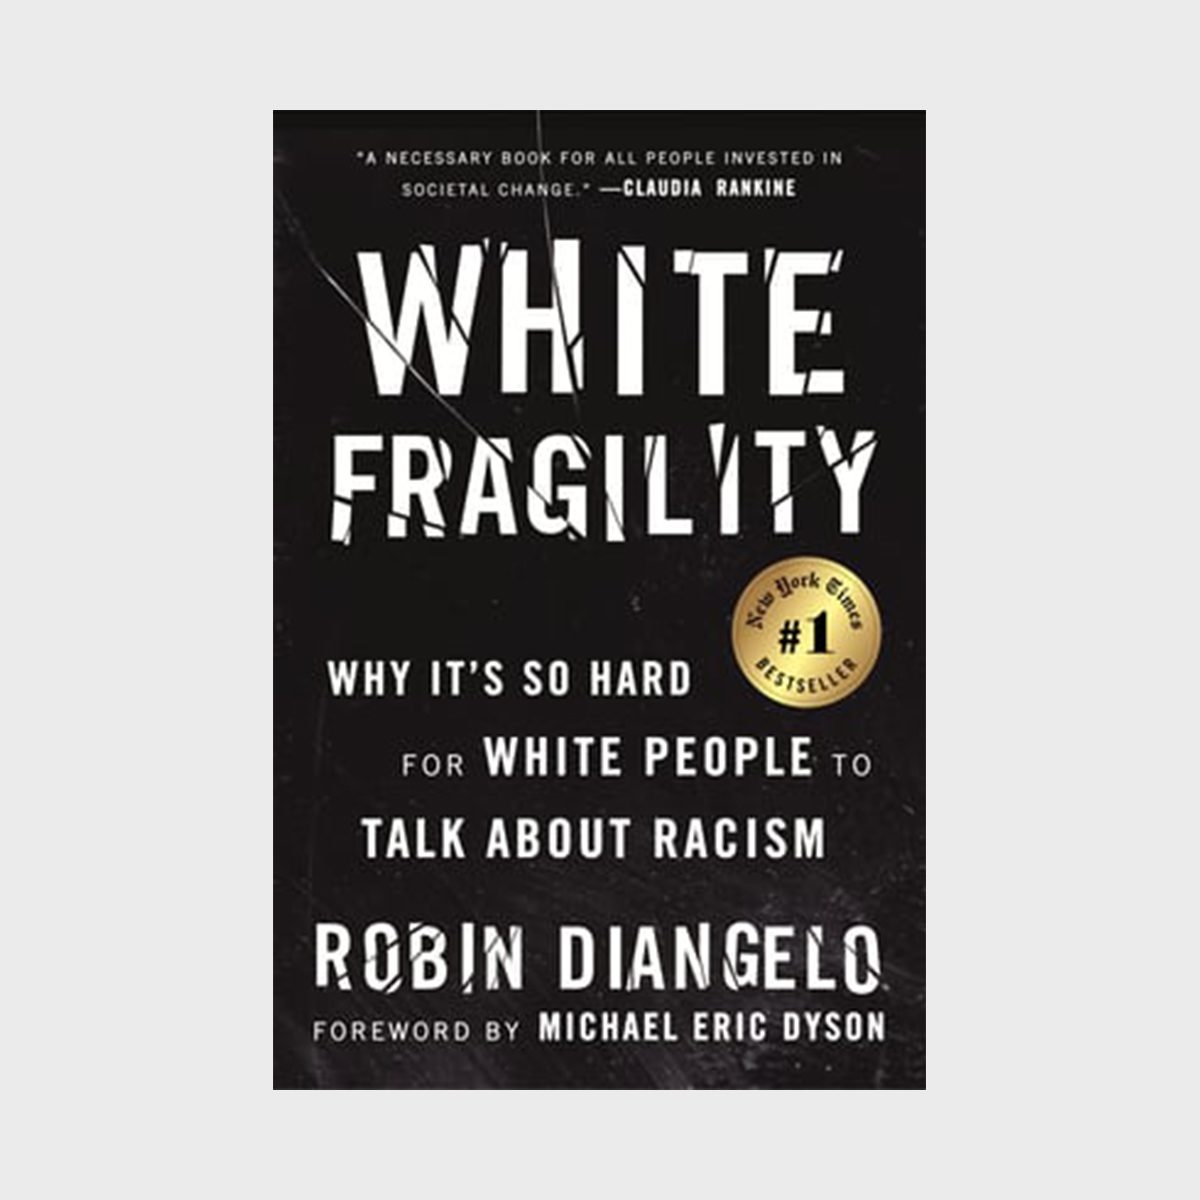 White Fragility Why It's So Hard For White People To Talk About Racism By Robin Diangelo